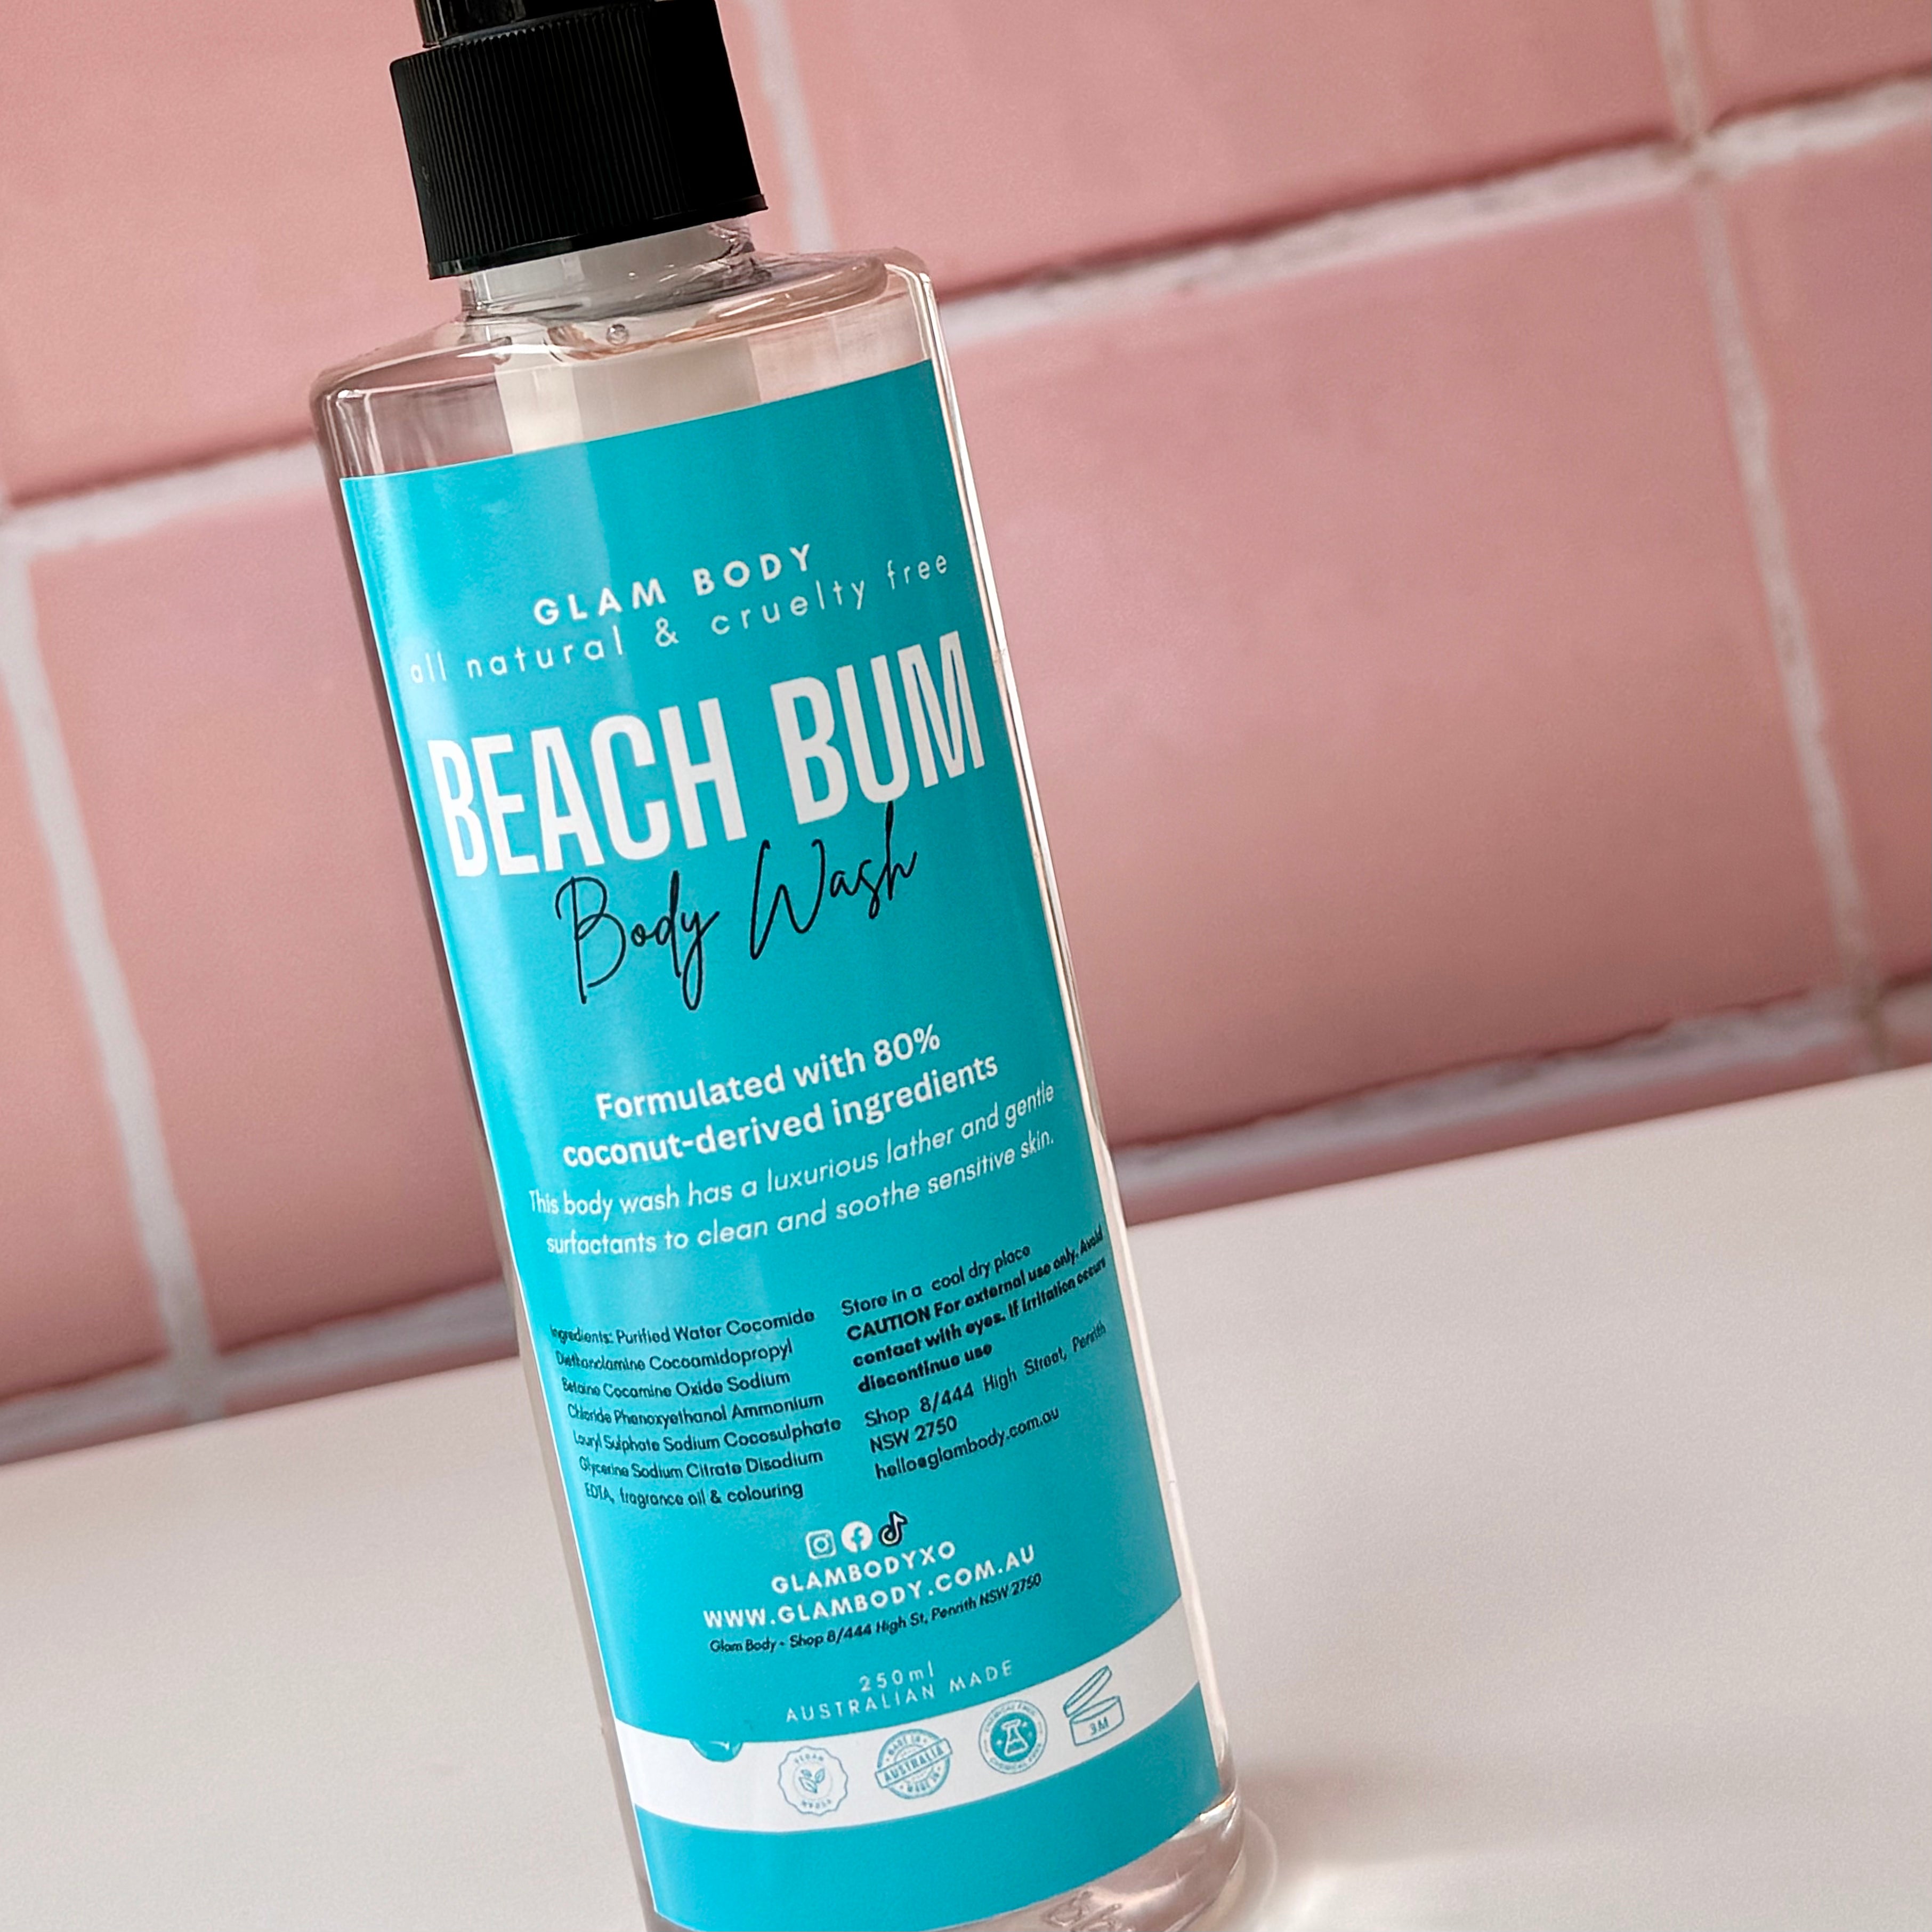 beach bum body wash formulated with 80% coconut derived ingredients 